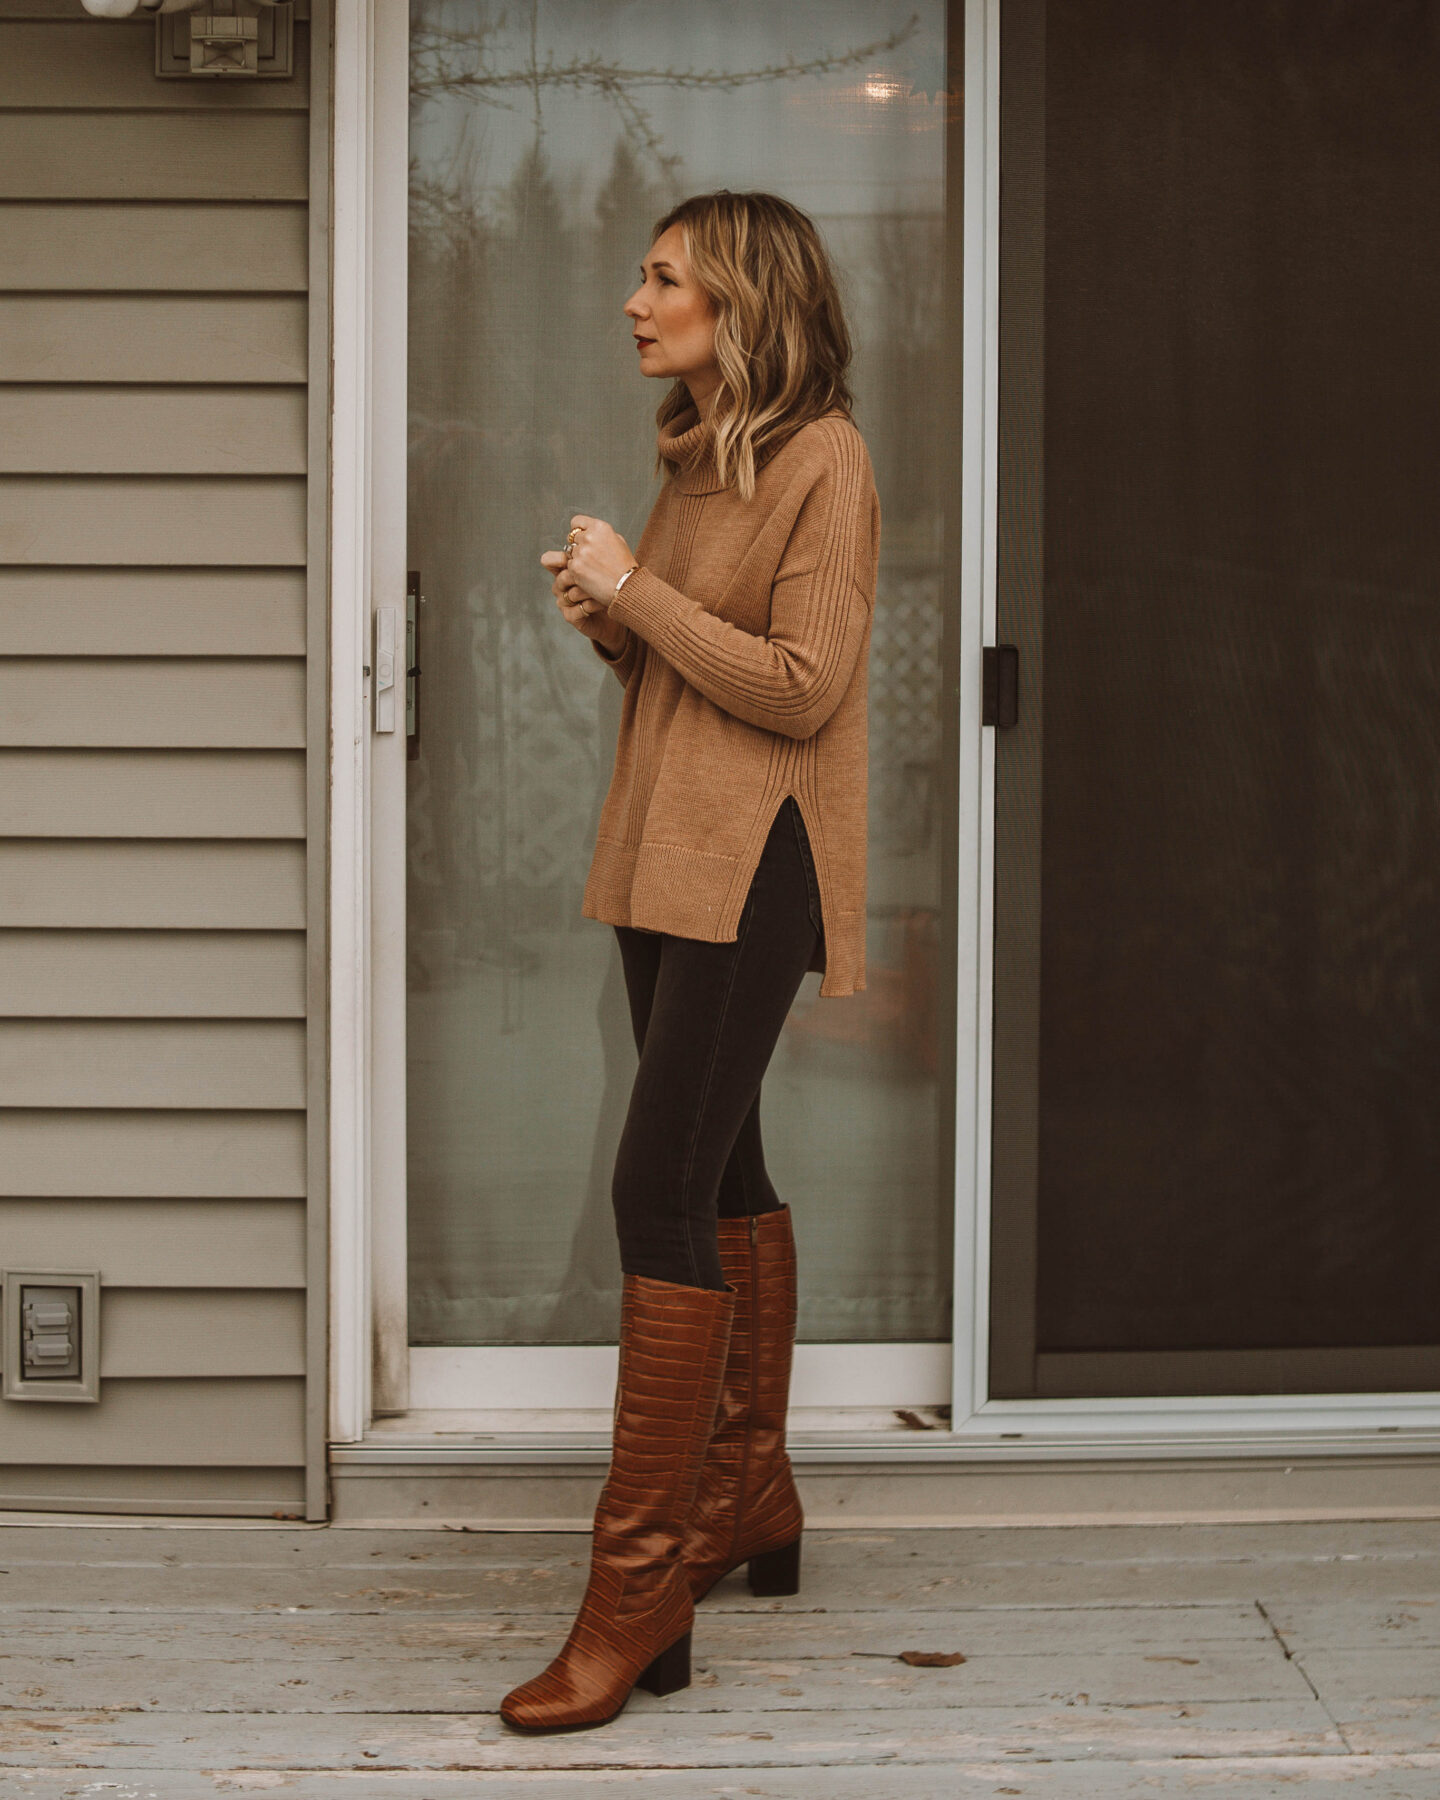 cozy at home christmas outfit ideas,camel turtleneck sweater, gray skinny jeans, croc effect boots, knee high boots